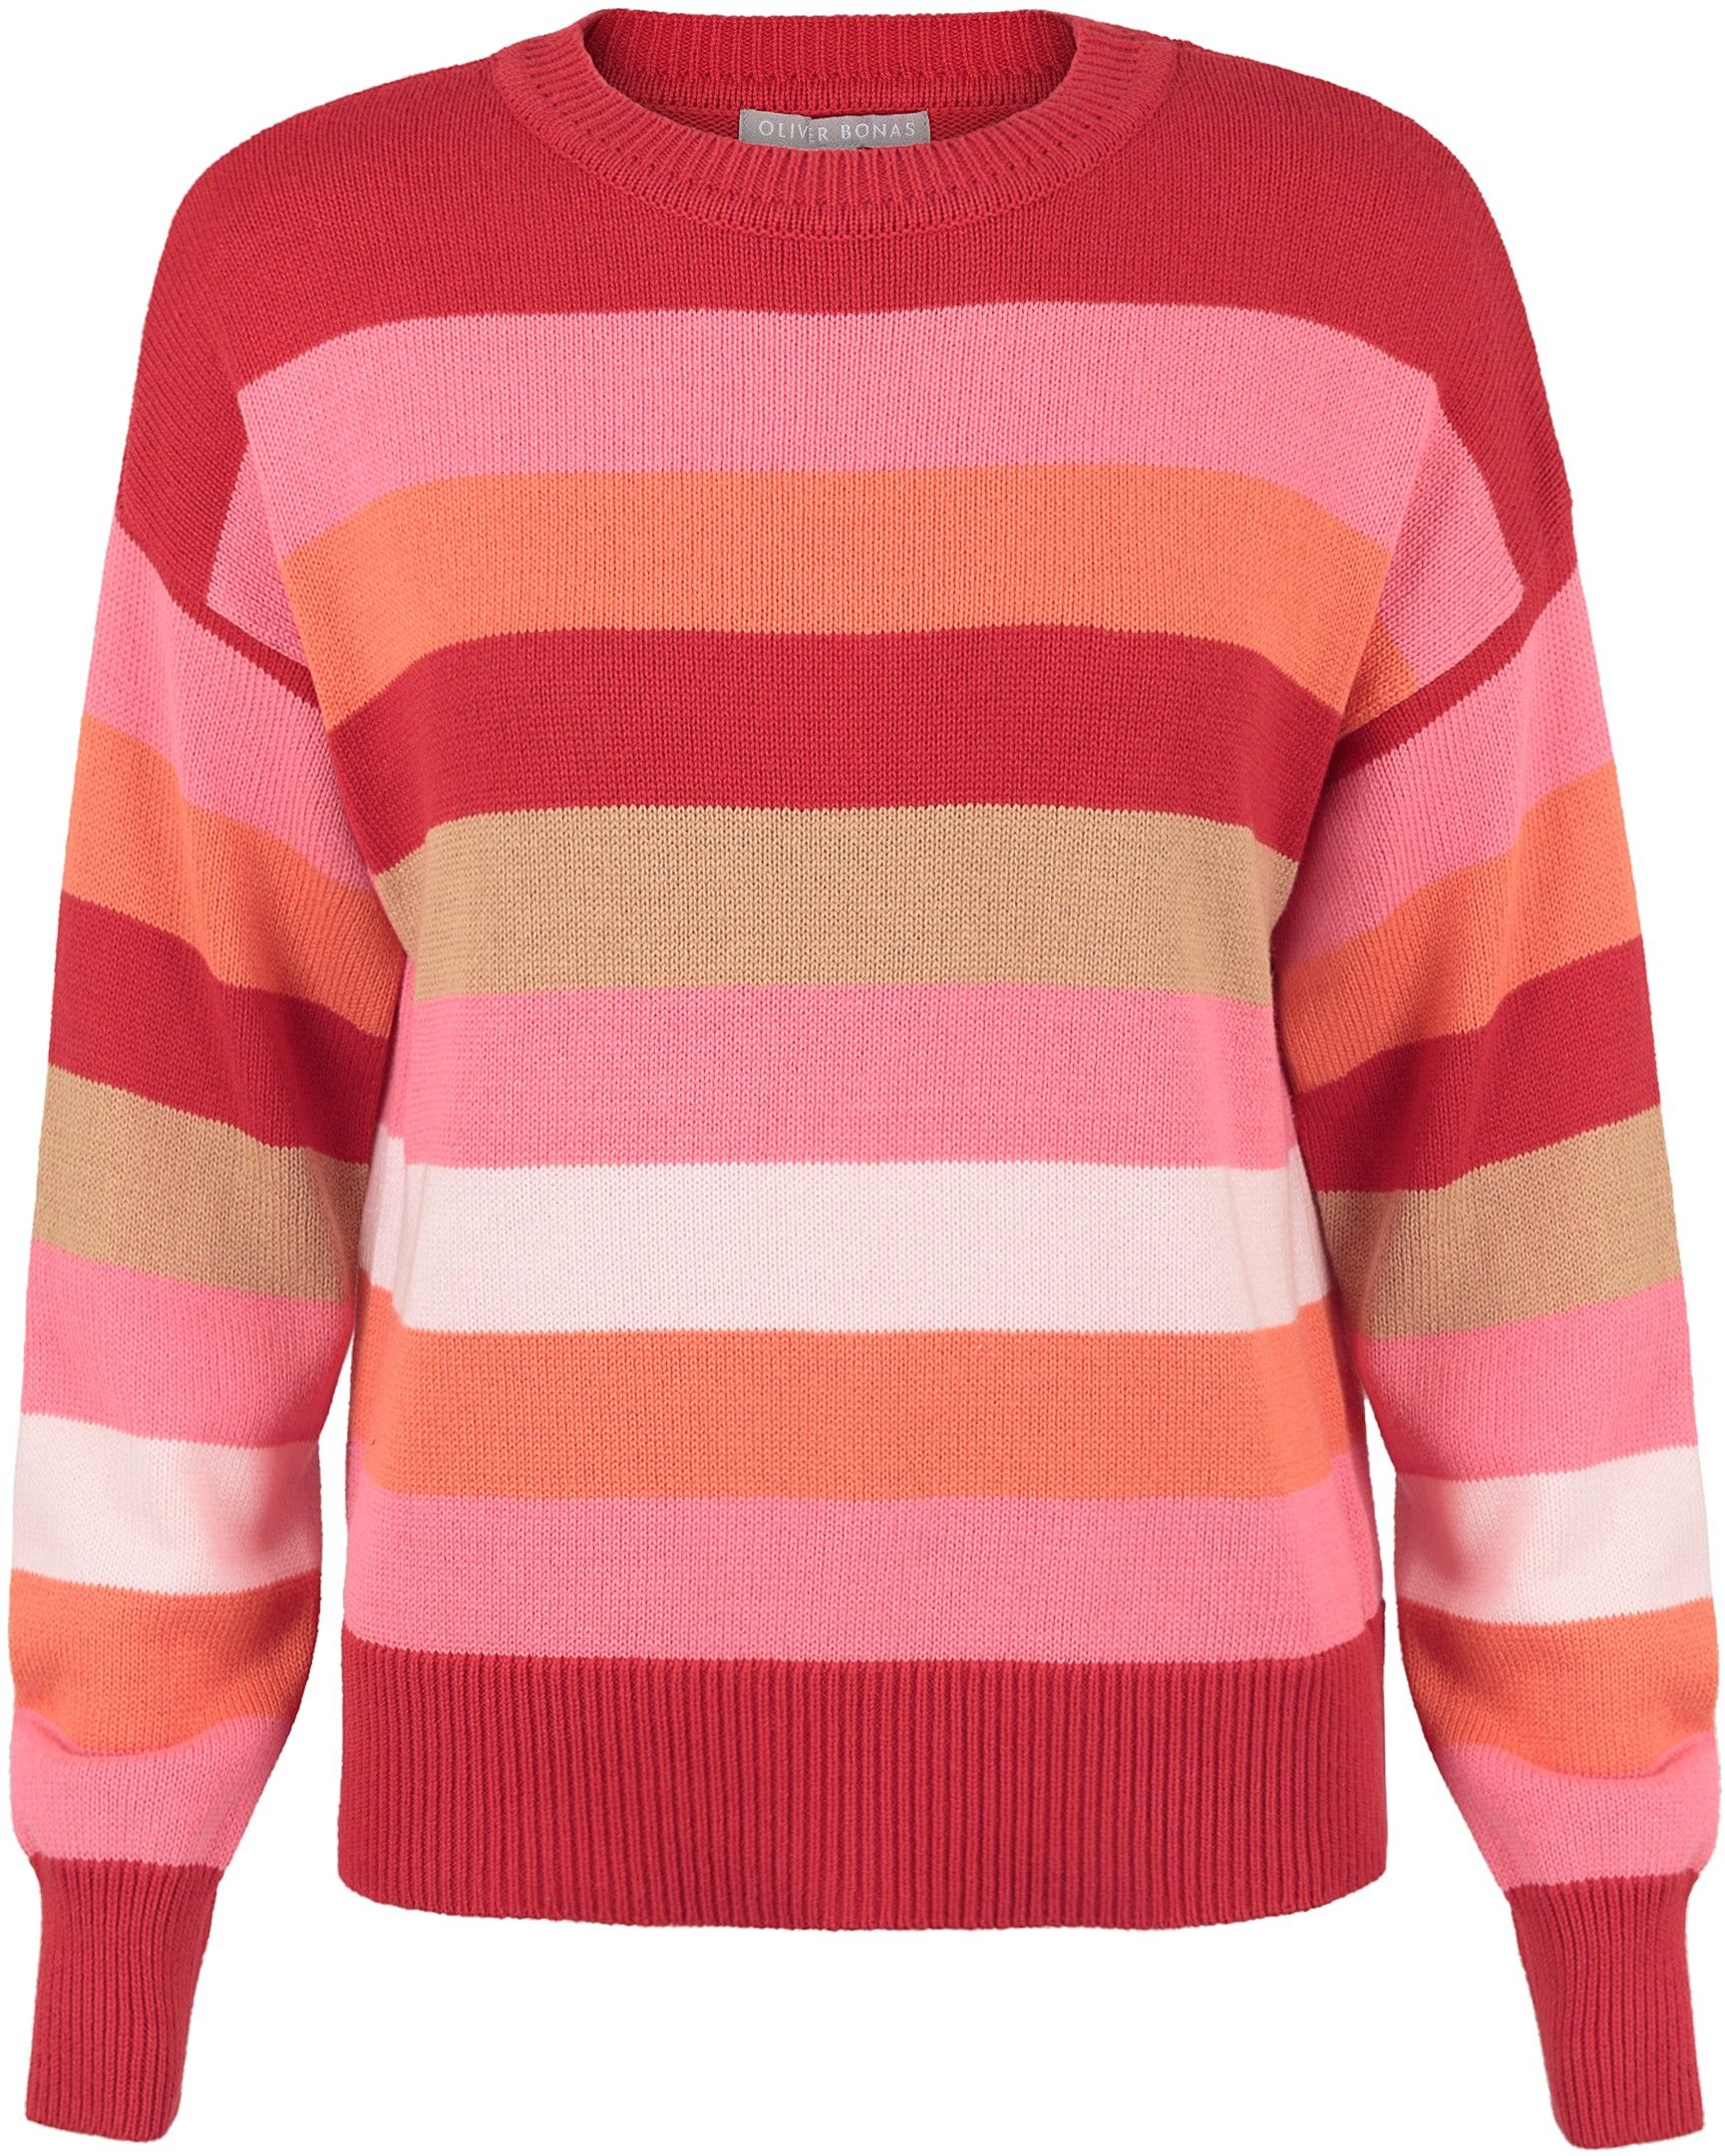 Knitwear | Women's Knitted Jumpers & Dresses | Oliver Bonas